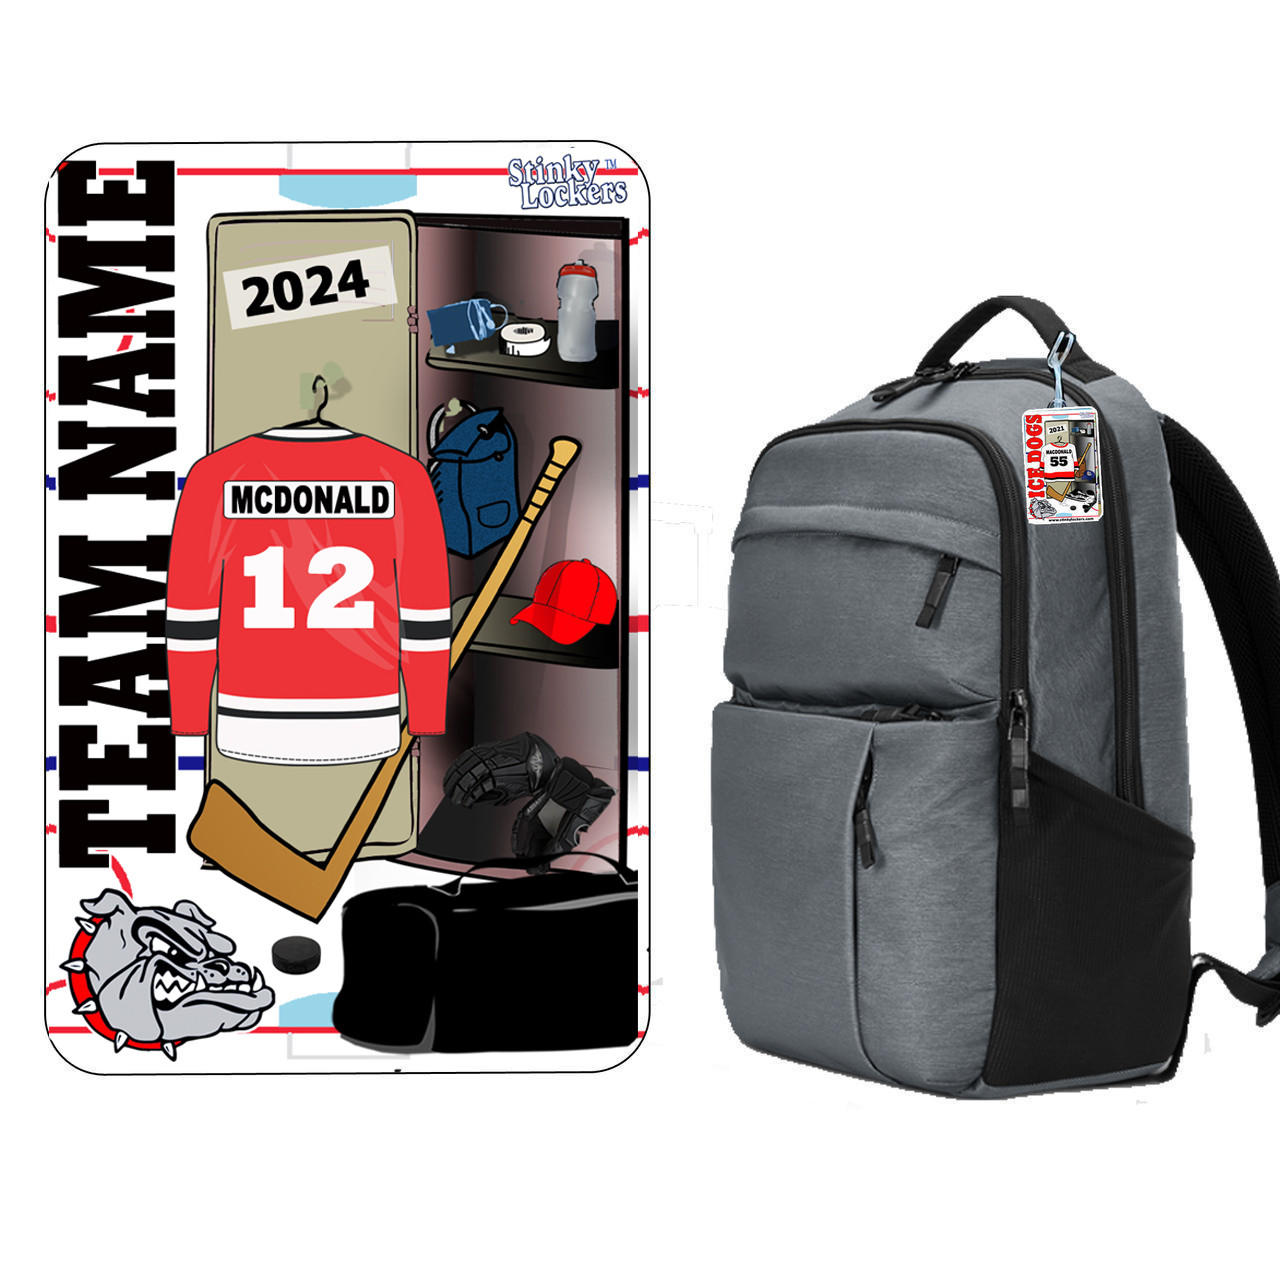 Personalized Pro Hockey Luggage Tag Questions & Answers